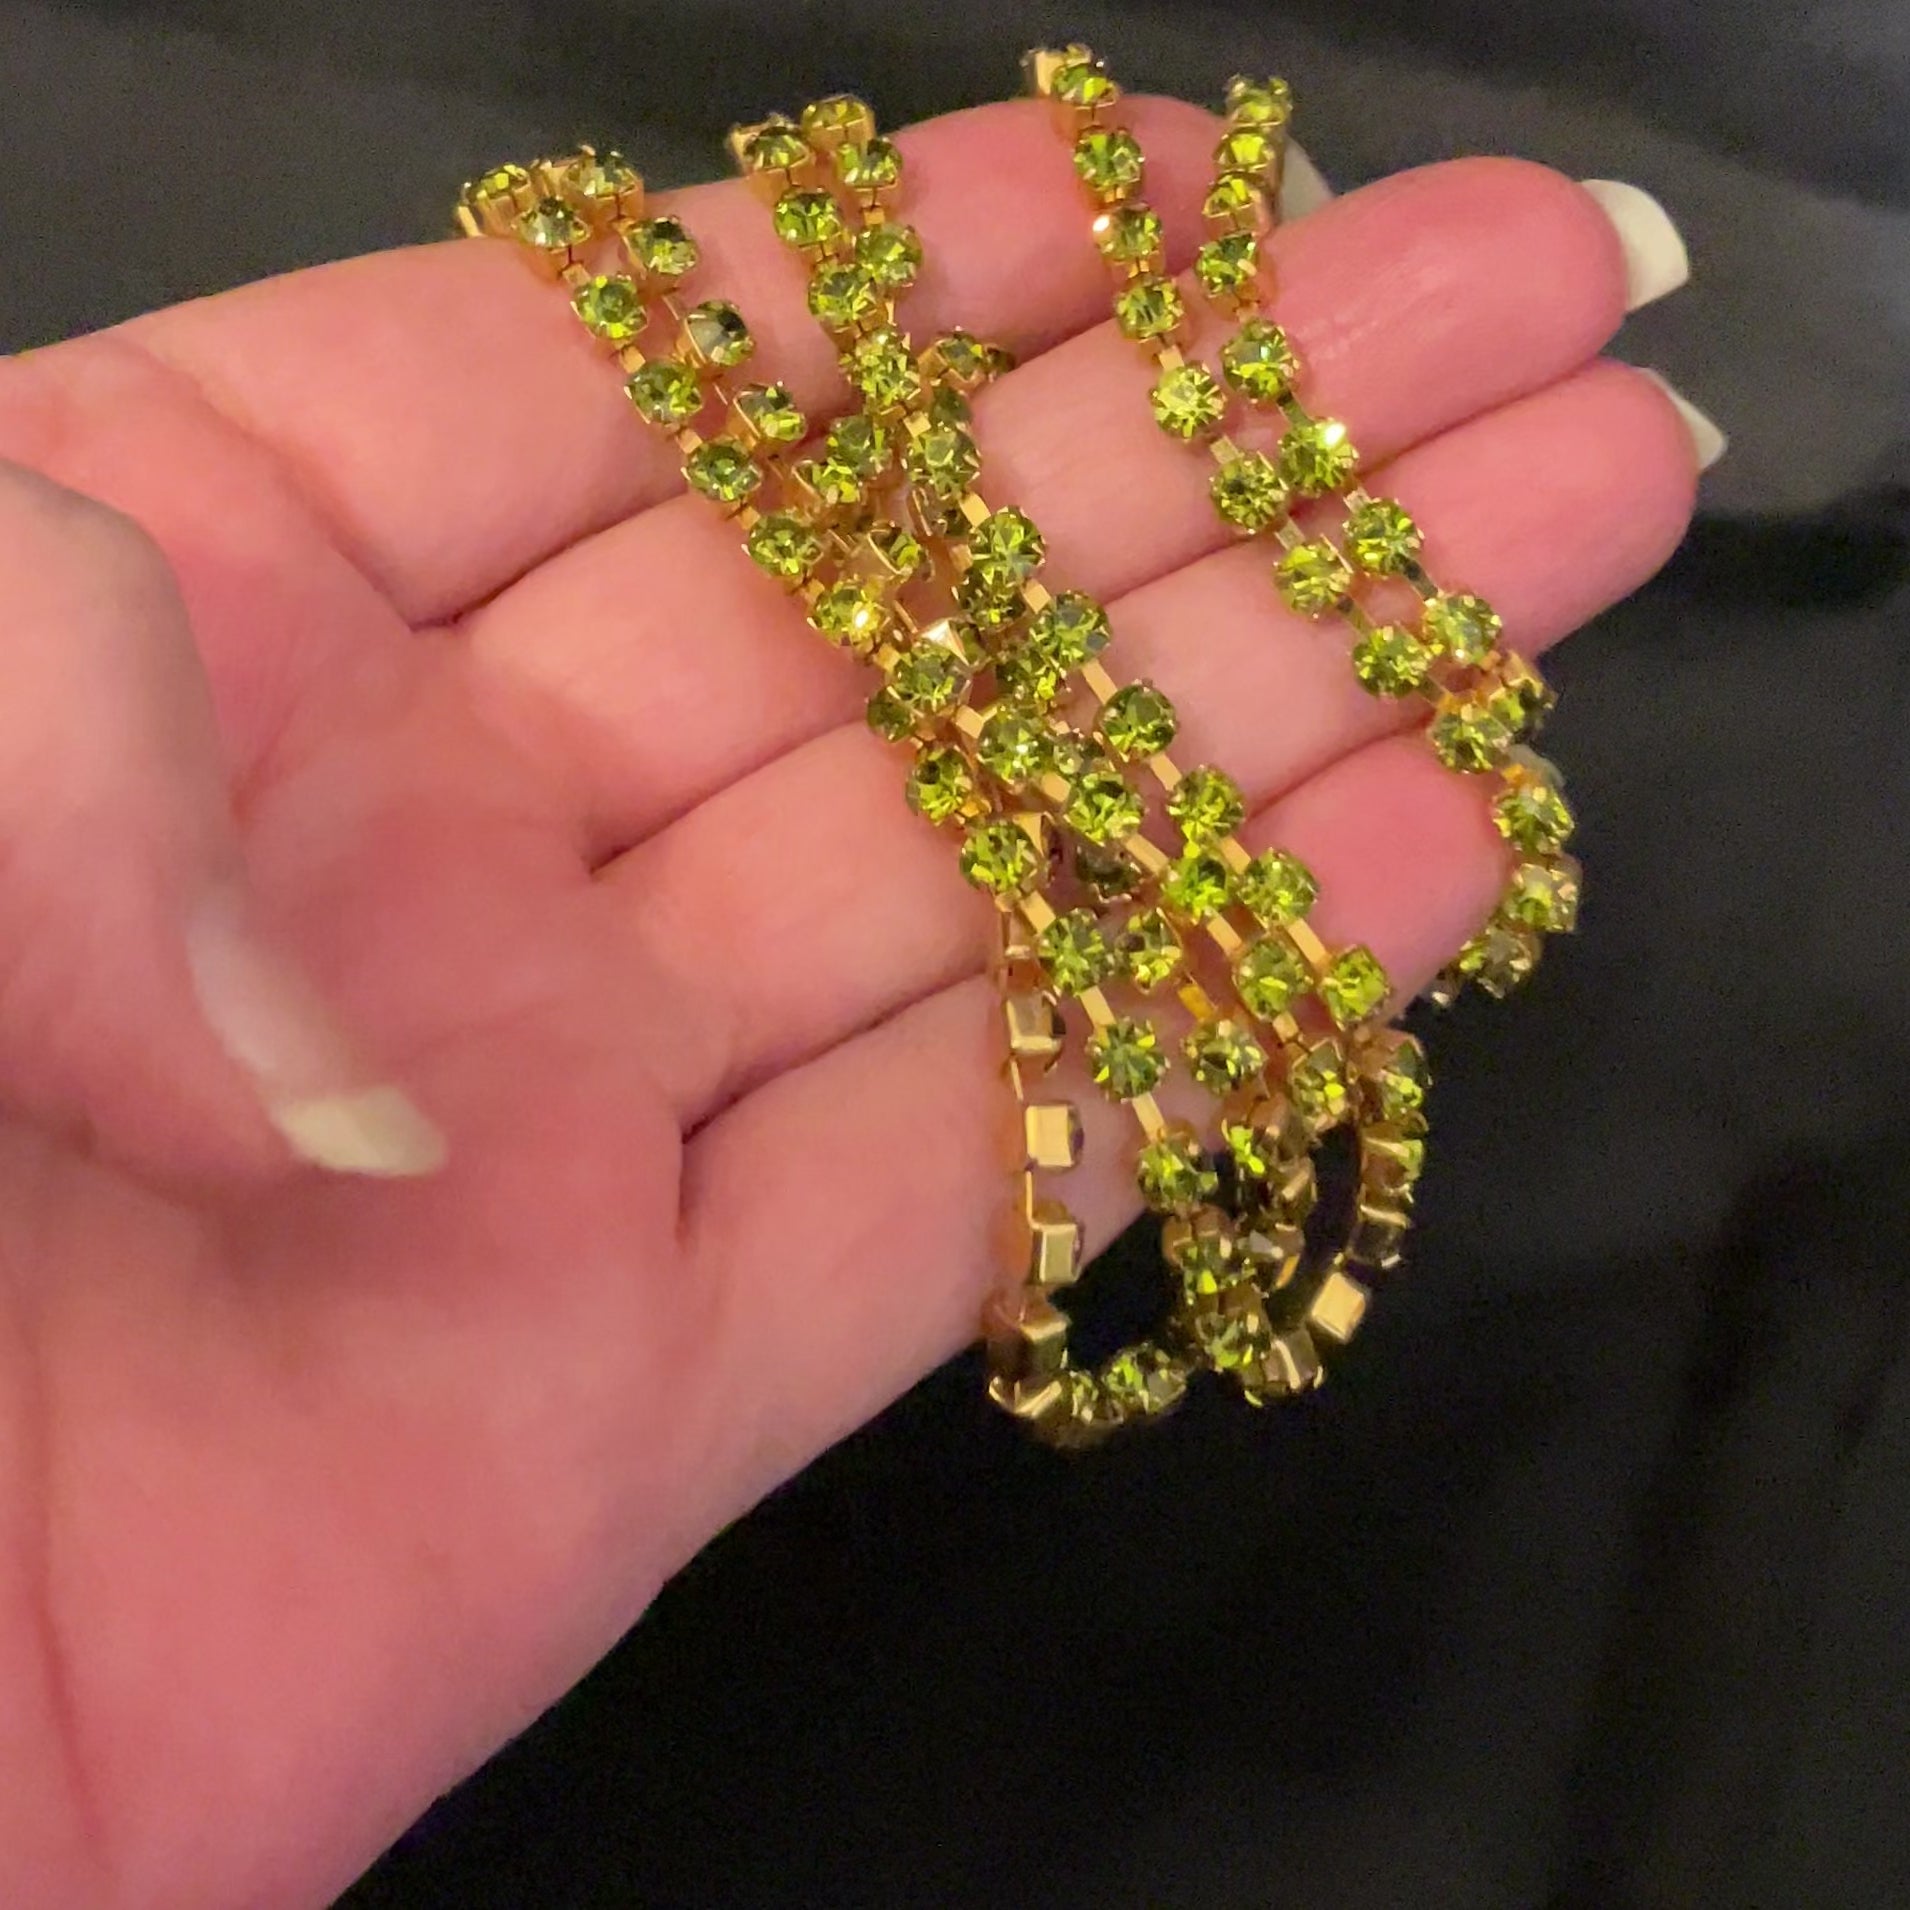 Liz Claiborne Long Peridot Green Color Vintage Rhinestone Necklace video showing how the rhinestones sparkle in the light.